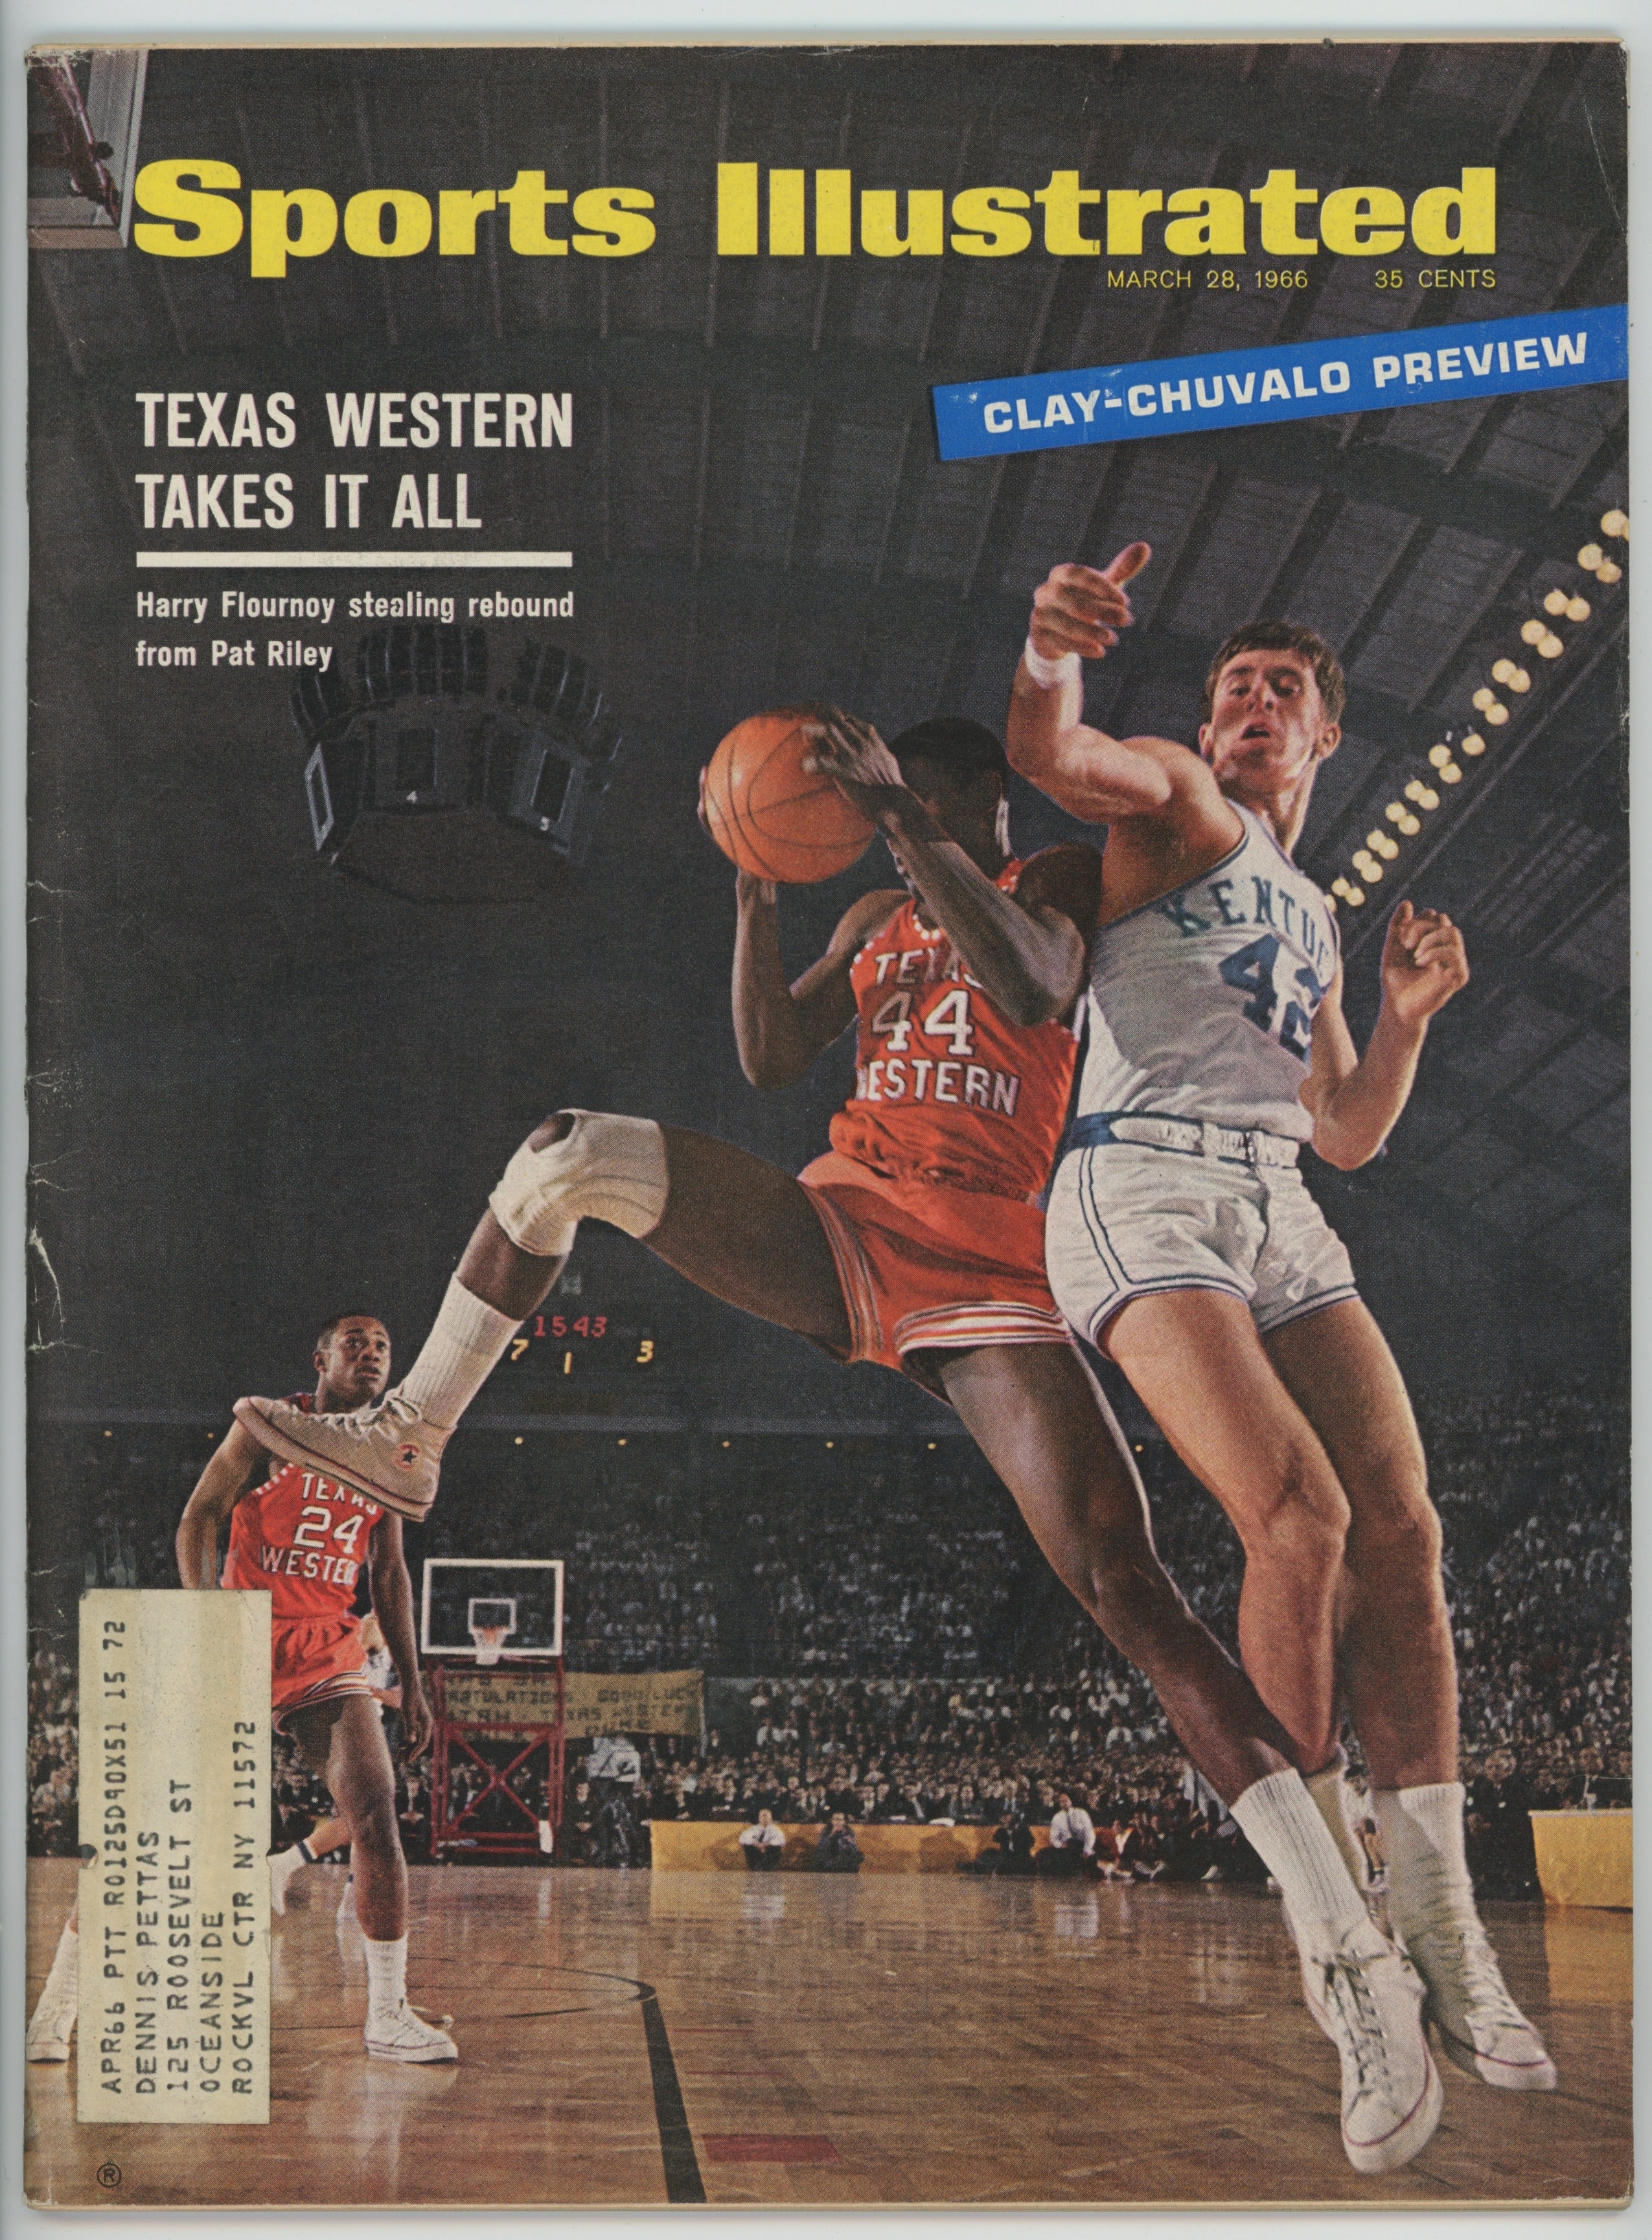 Pat Riley Kentucky “Clay-Chavalo Preview”  3/28/66 EX ML